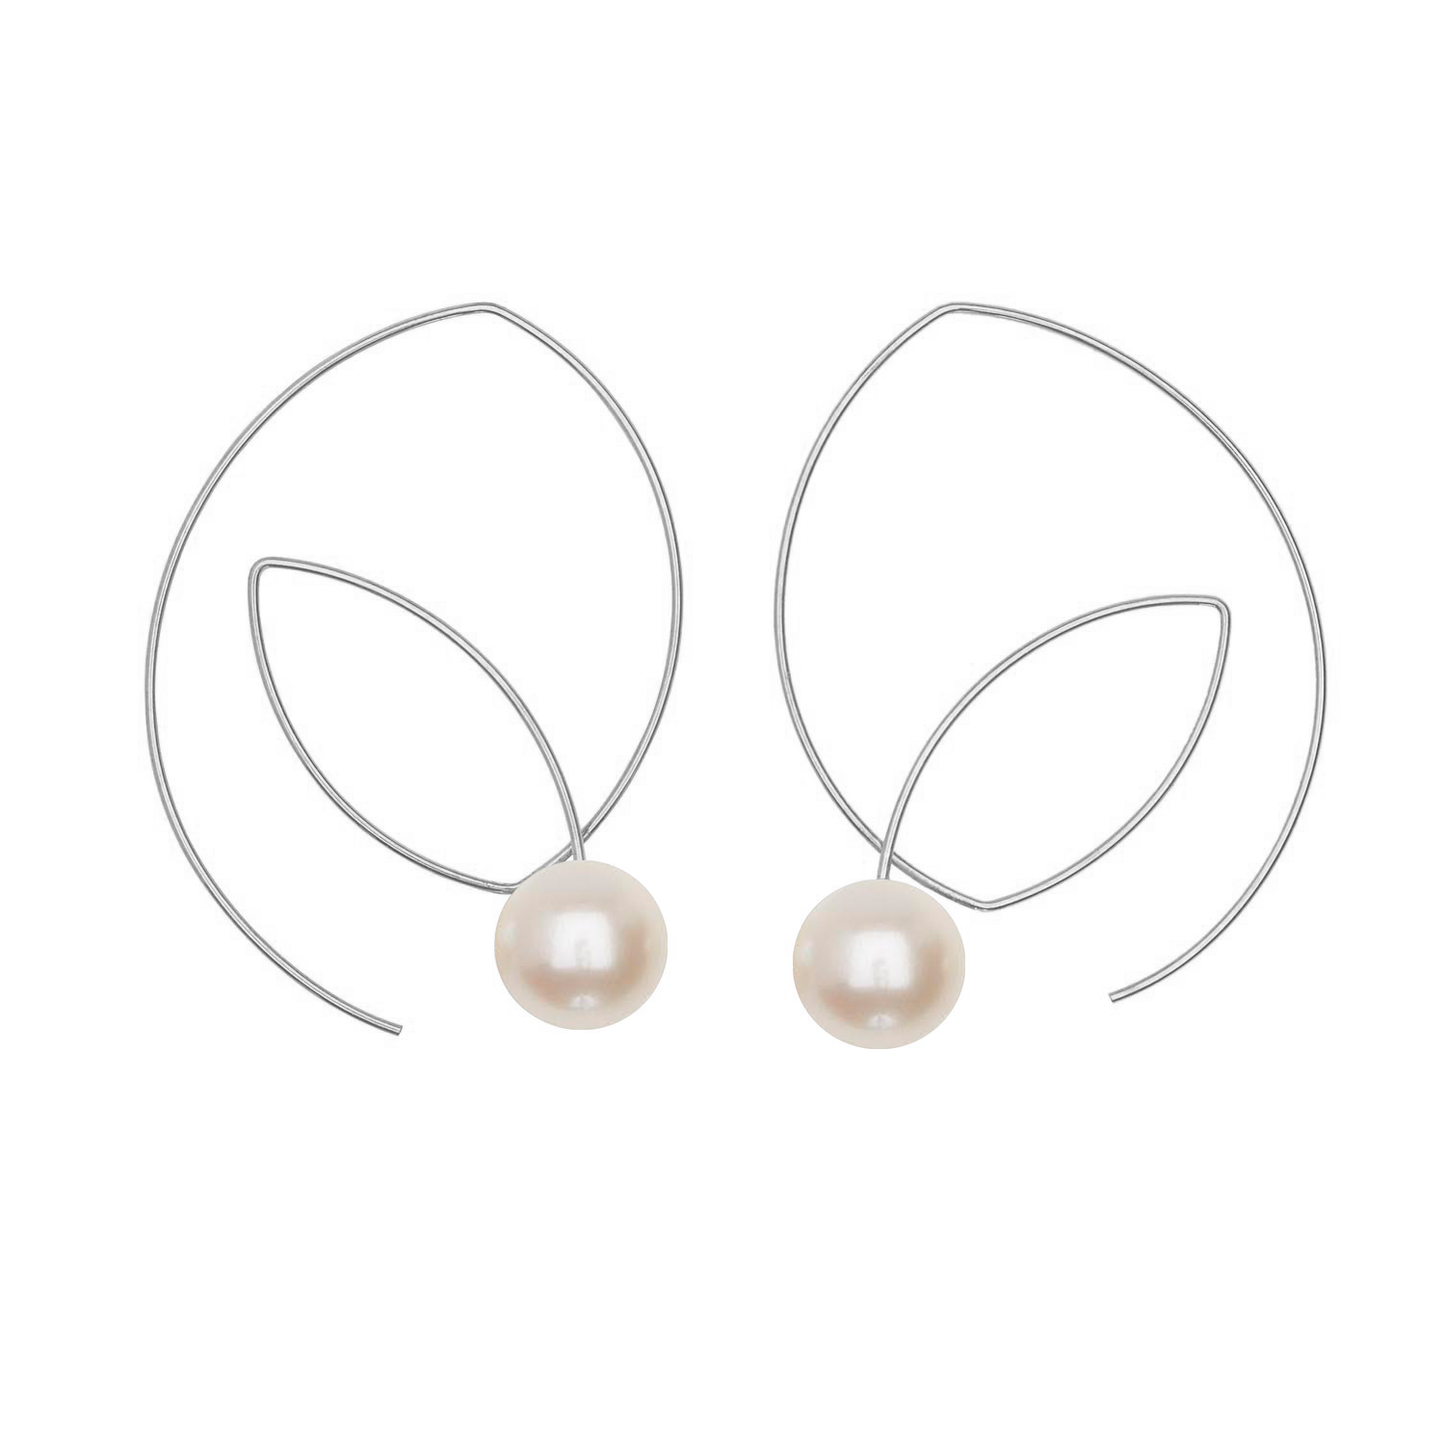 Large Angled Loop Earrings with Round Natural Freshwater Pearls with colour options